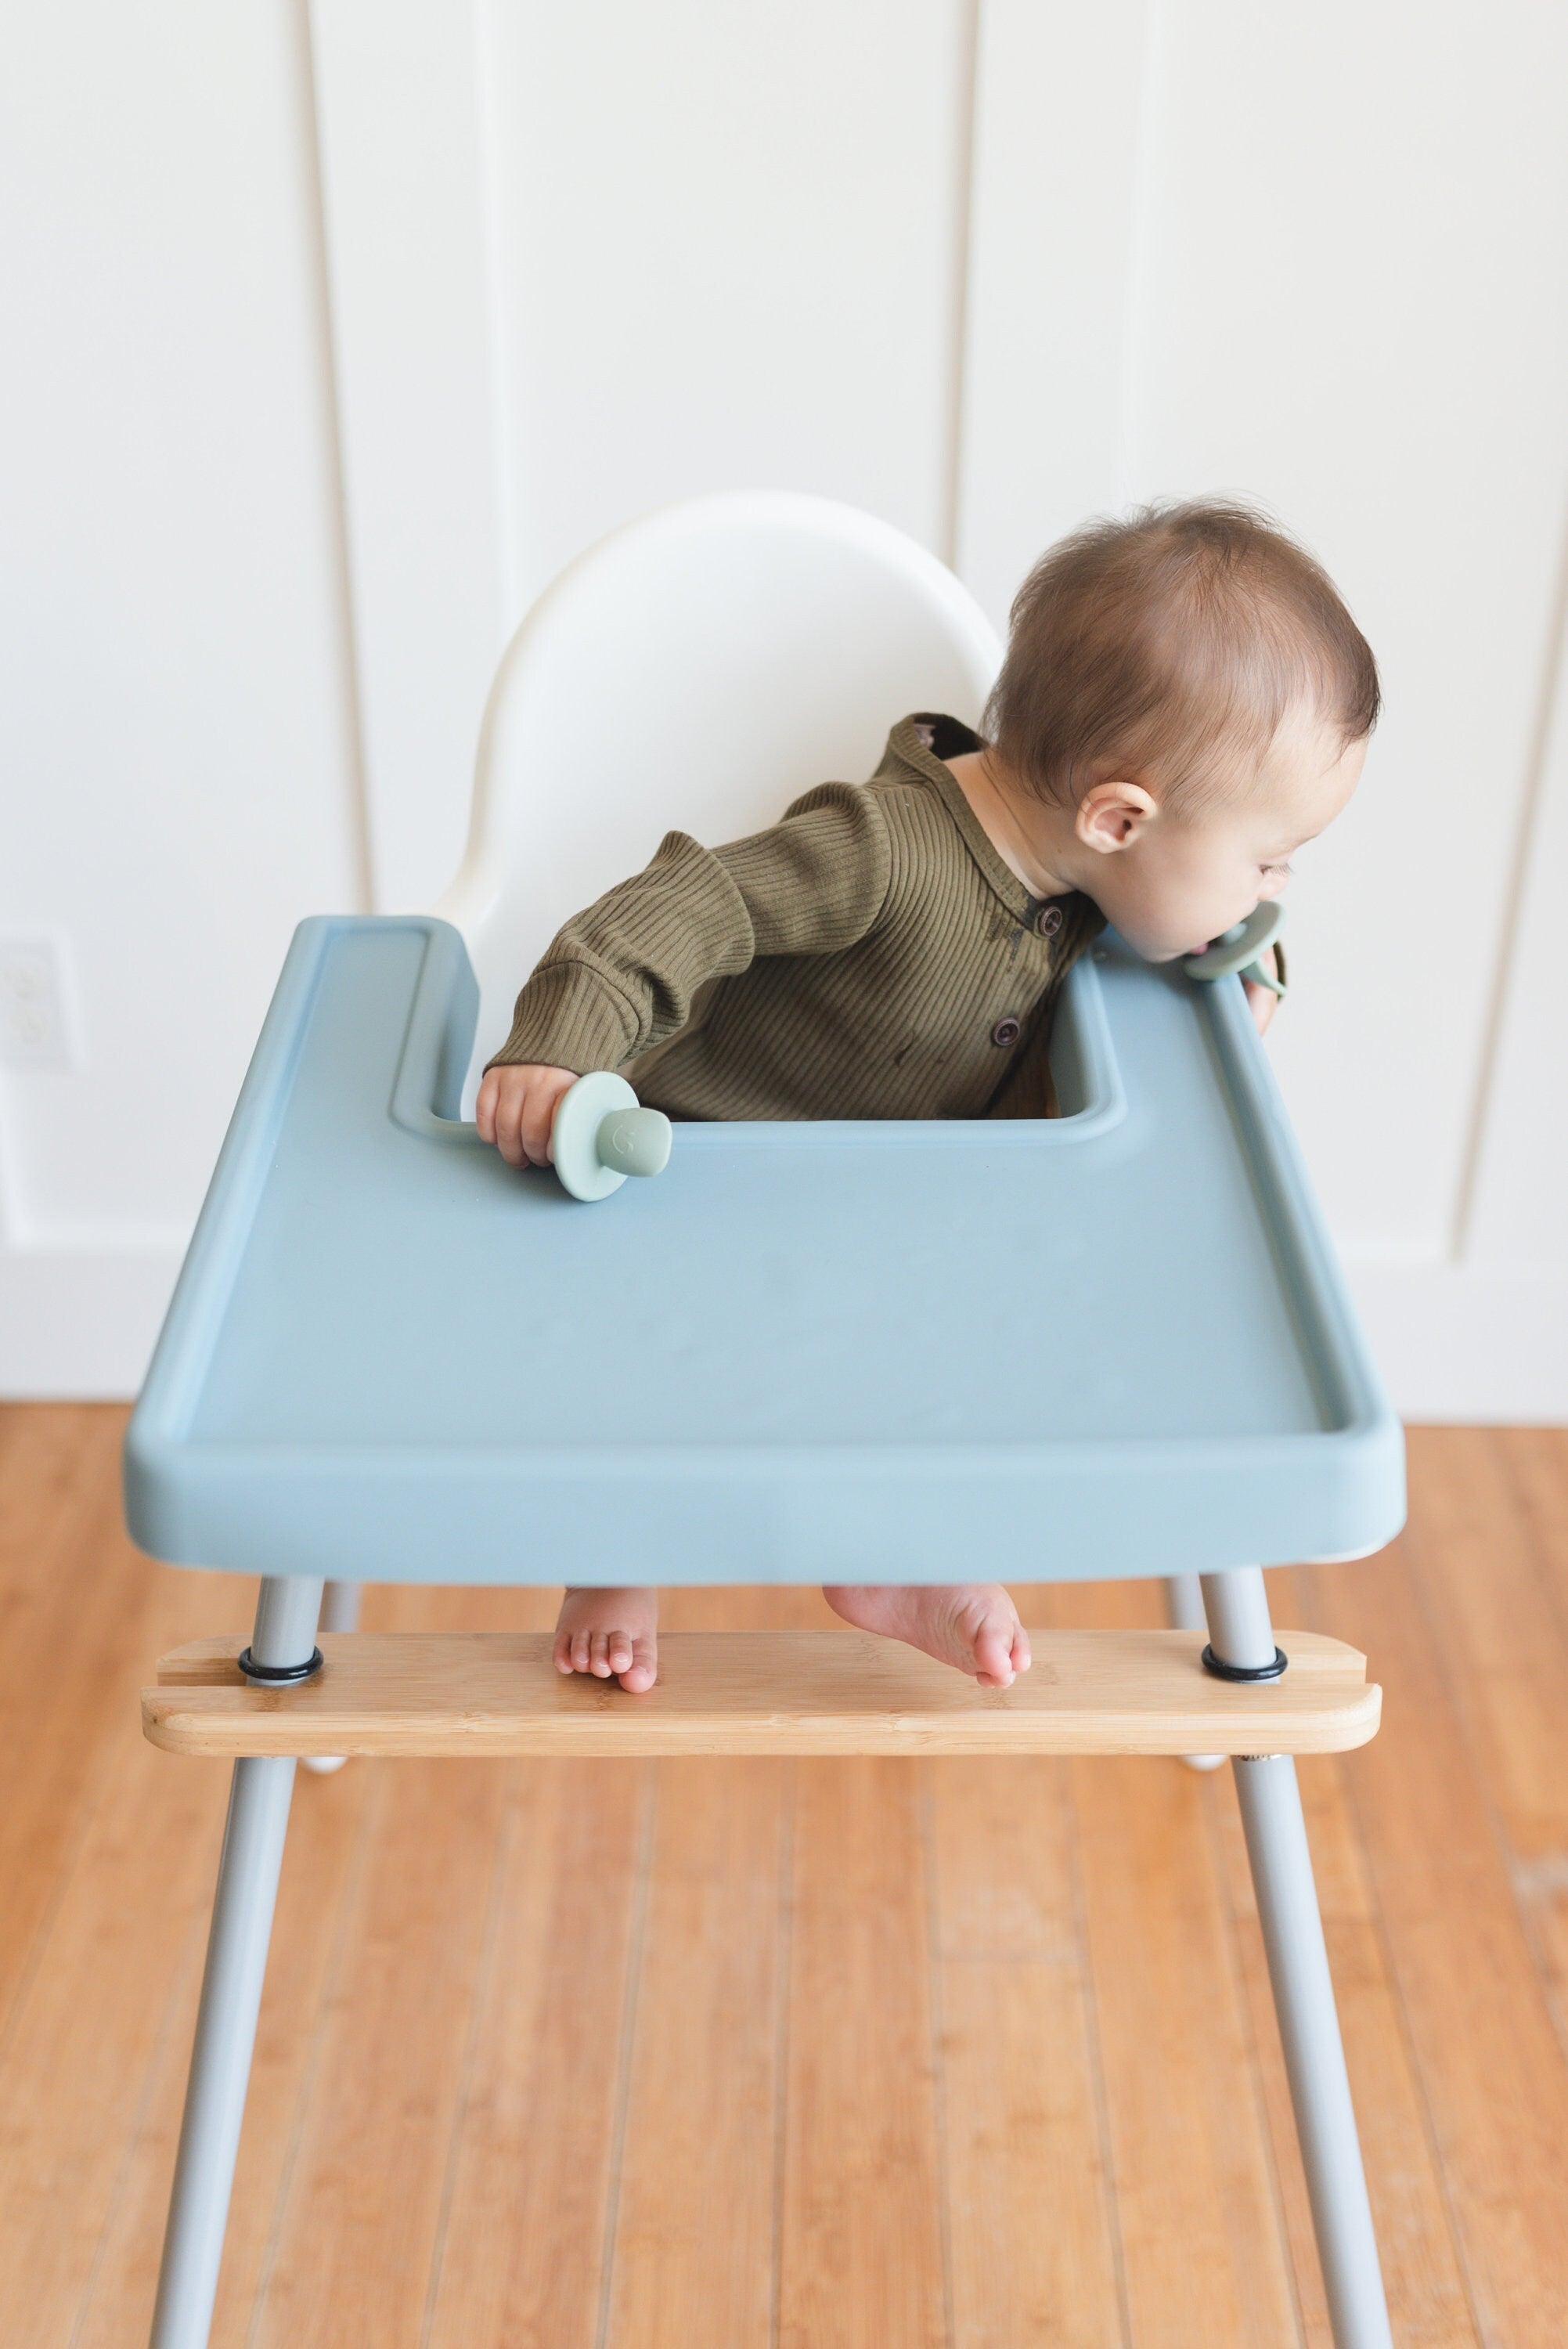 Full-Coverage IKEA High Chair Placemat - more colors